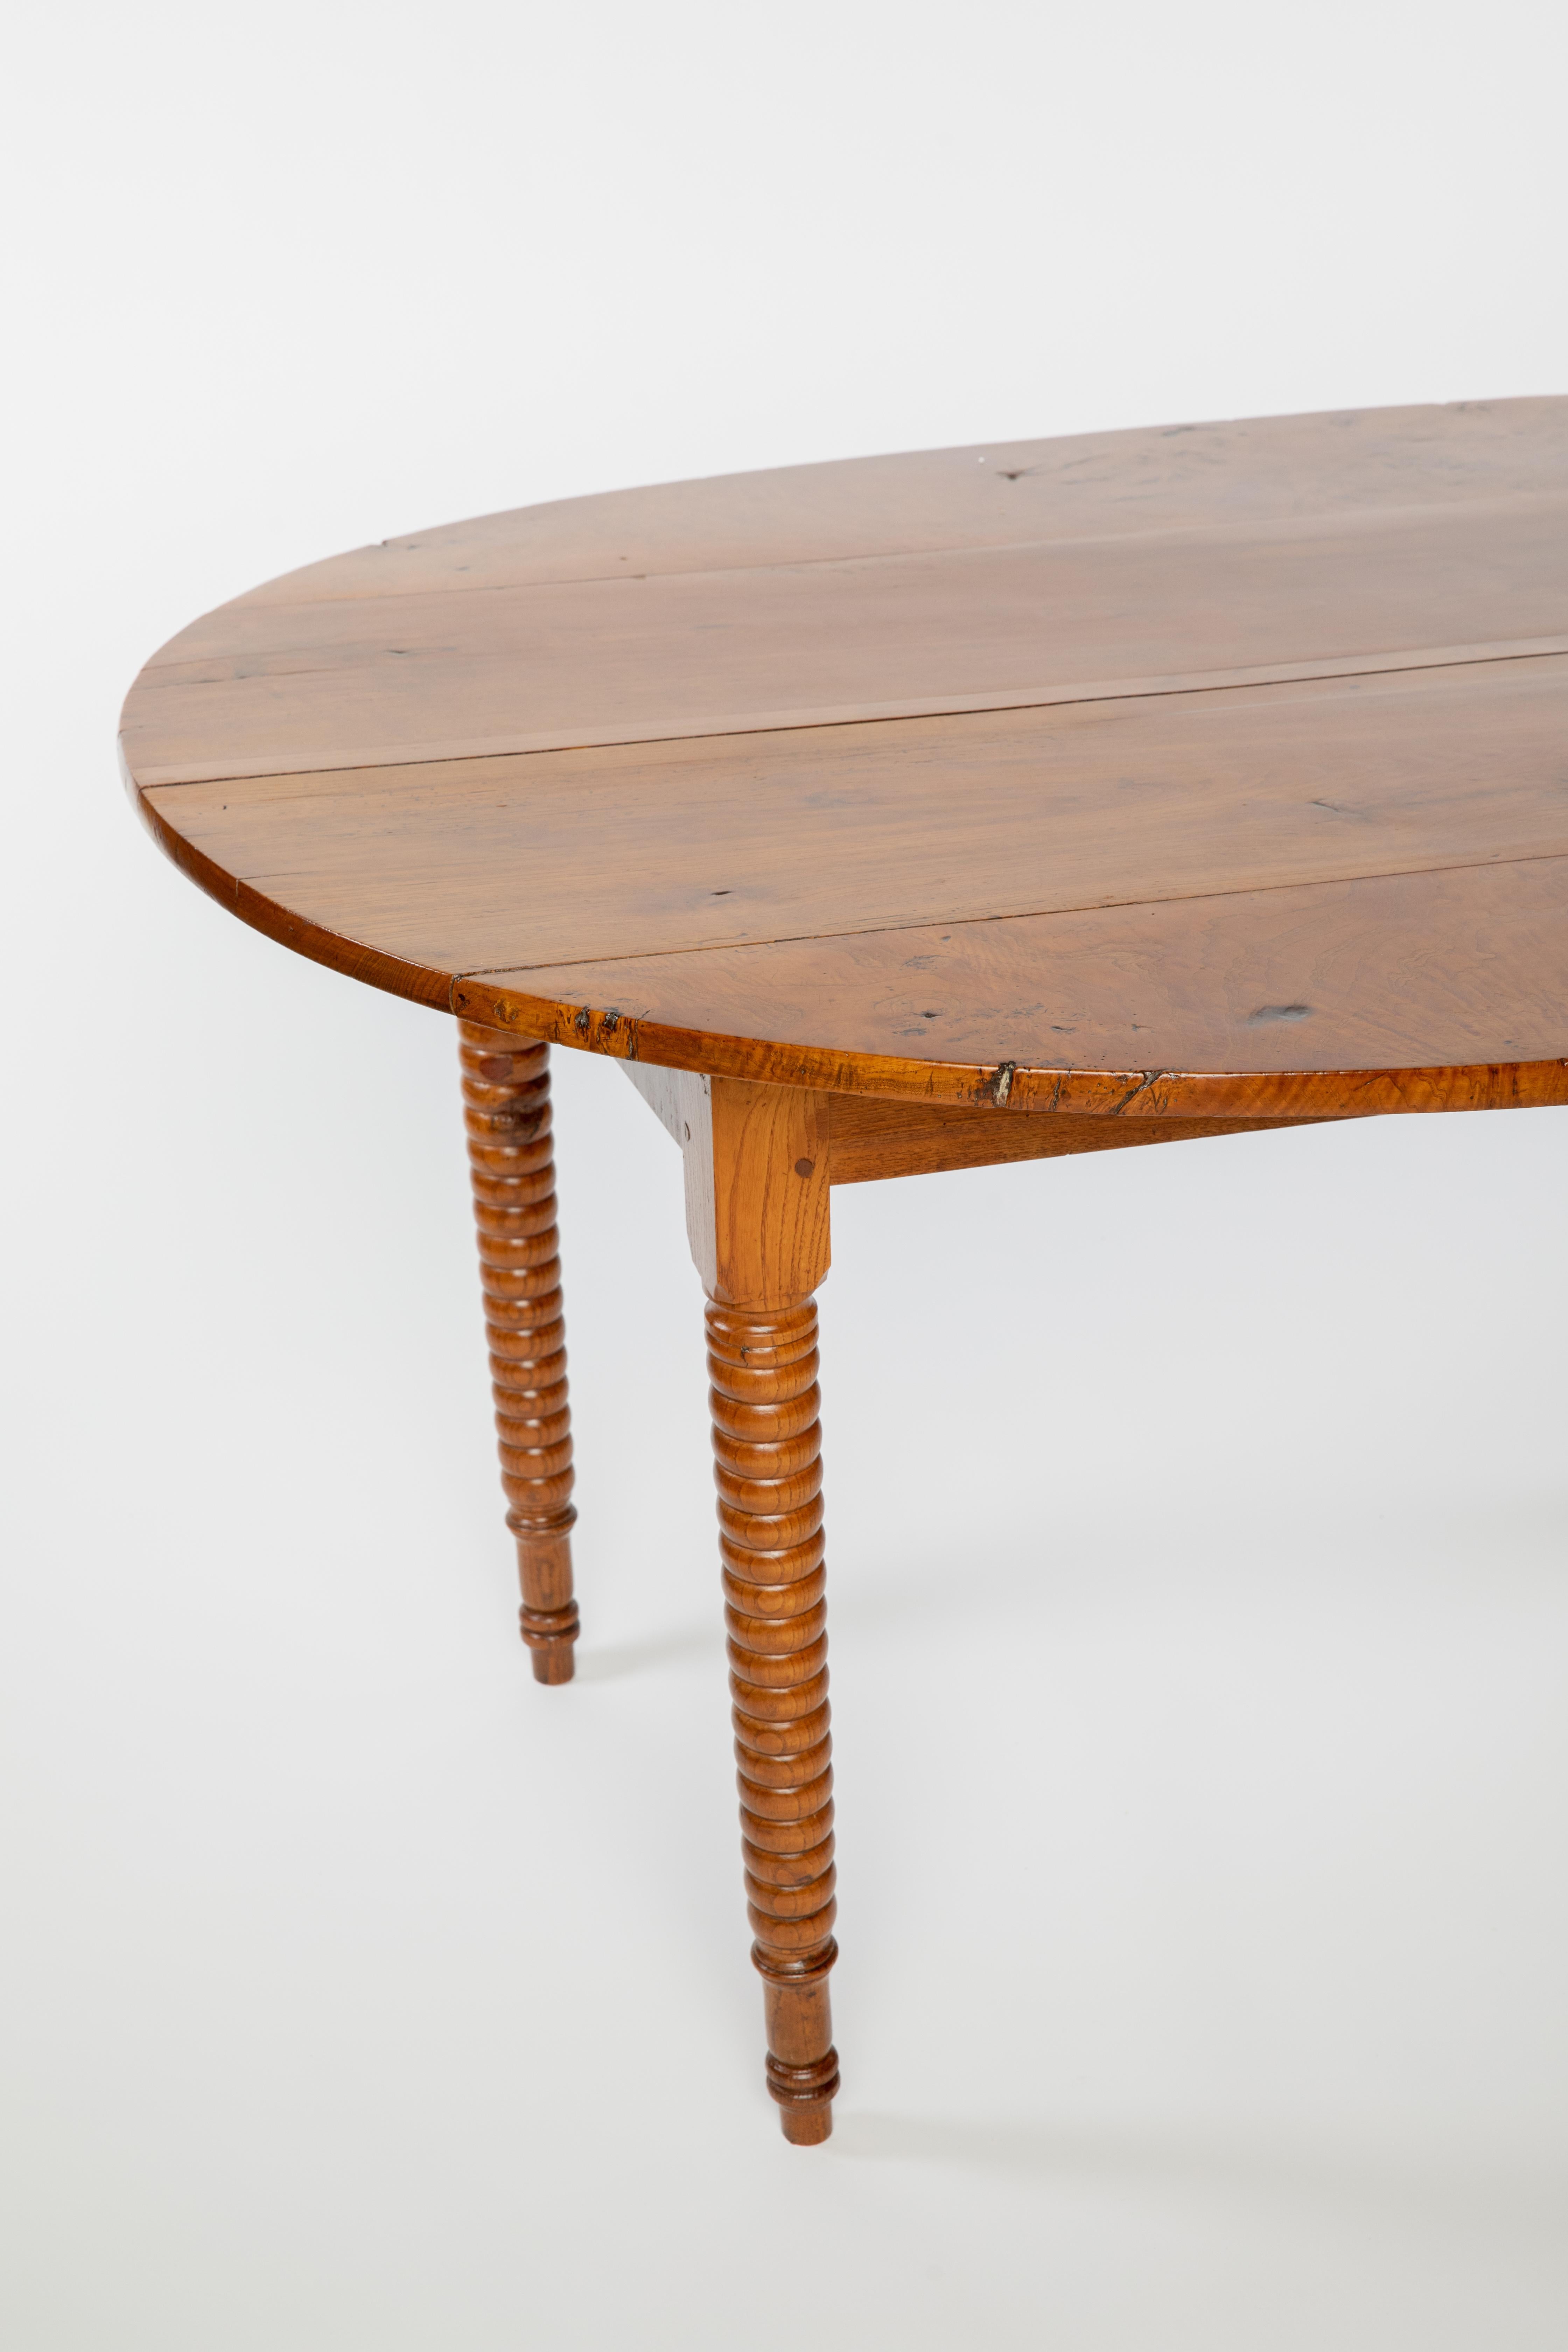 Rustic French mixed wood farmhouse table, 19th c., having oval-shaped plank top, over spool-turned legs, ending in blunt arrow feet.